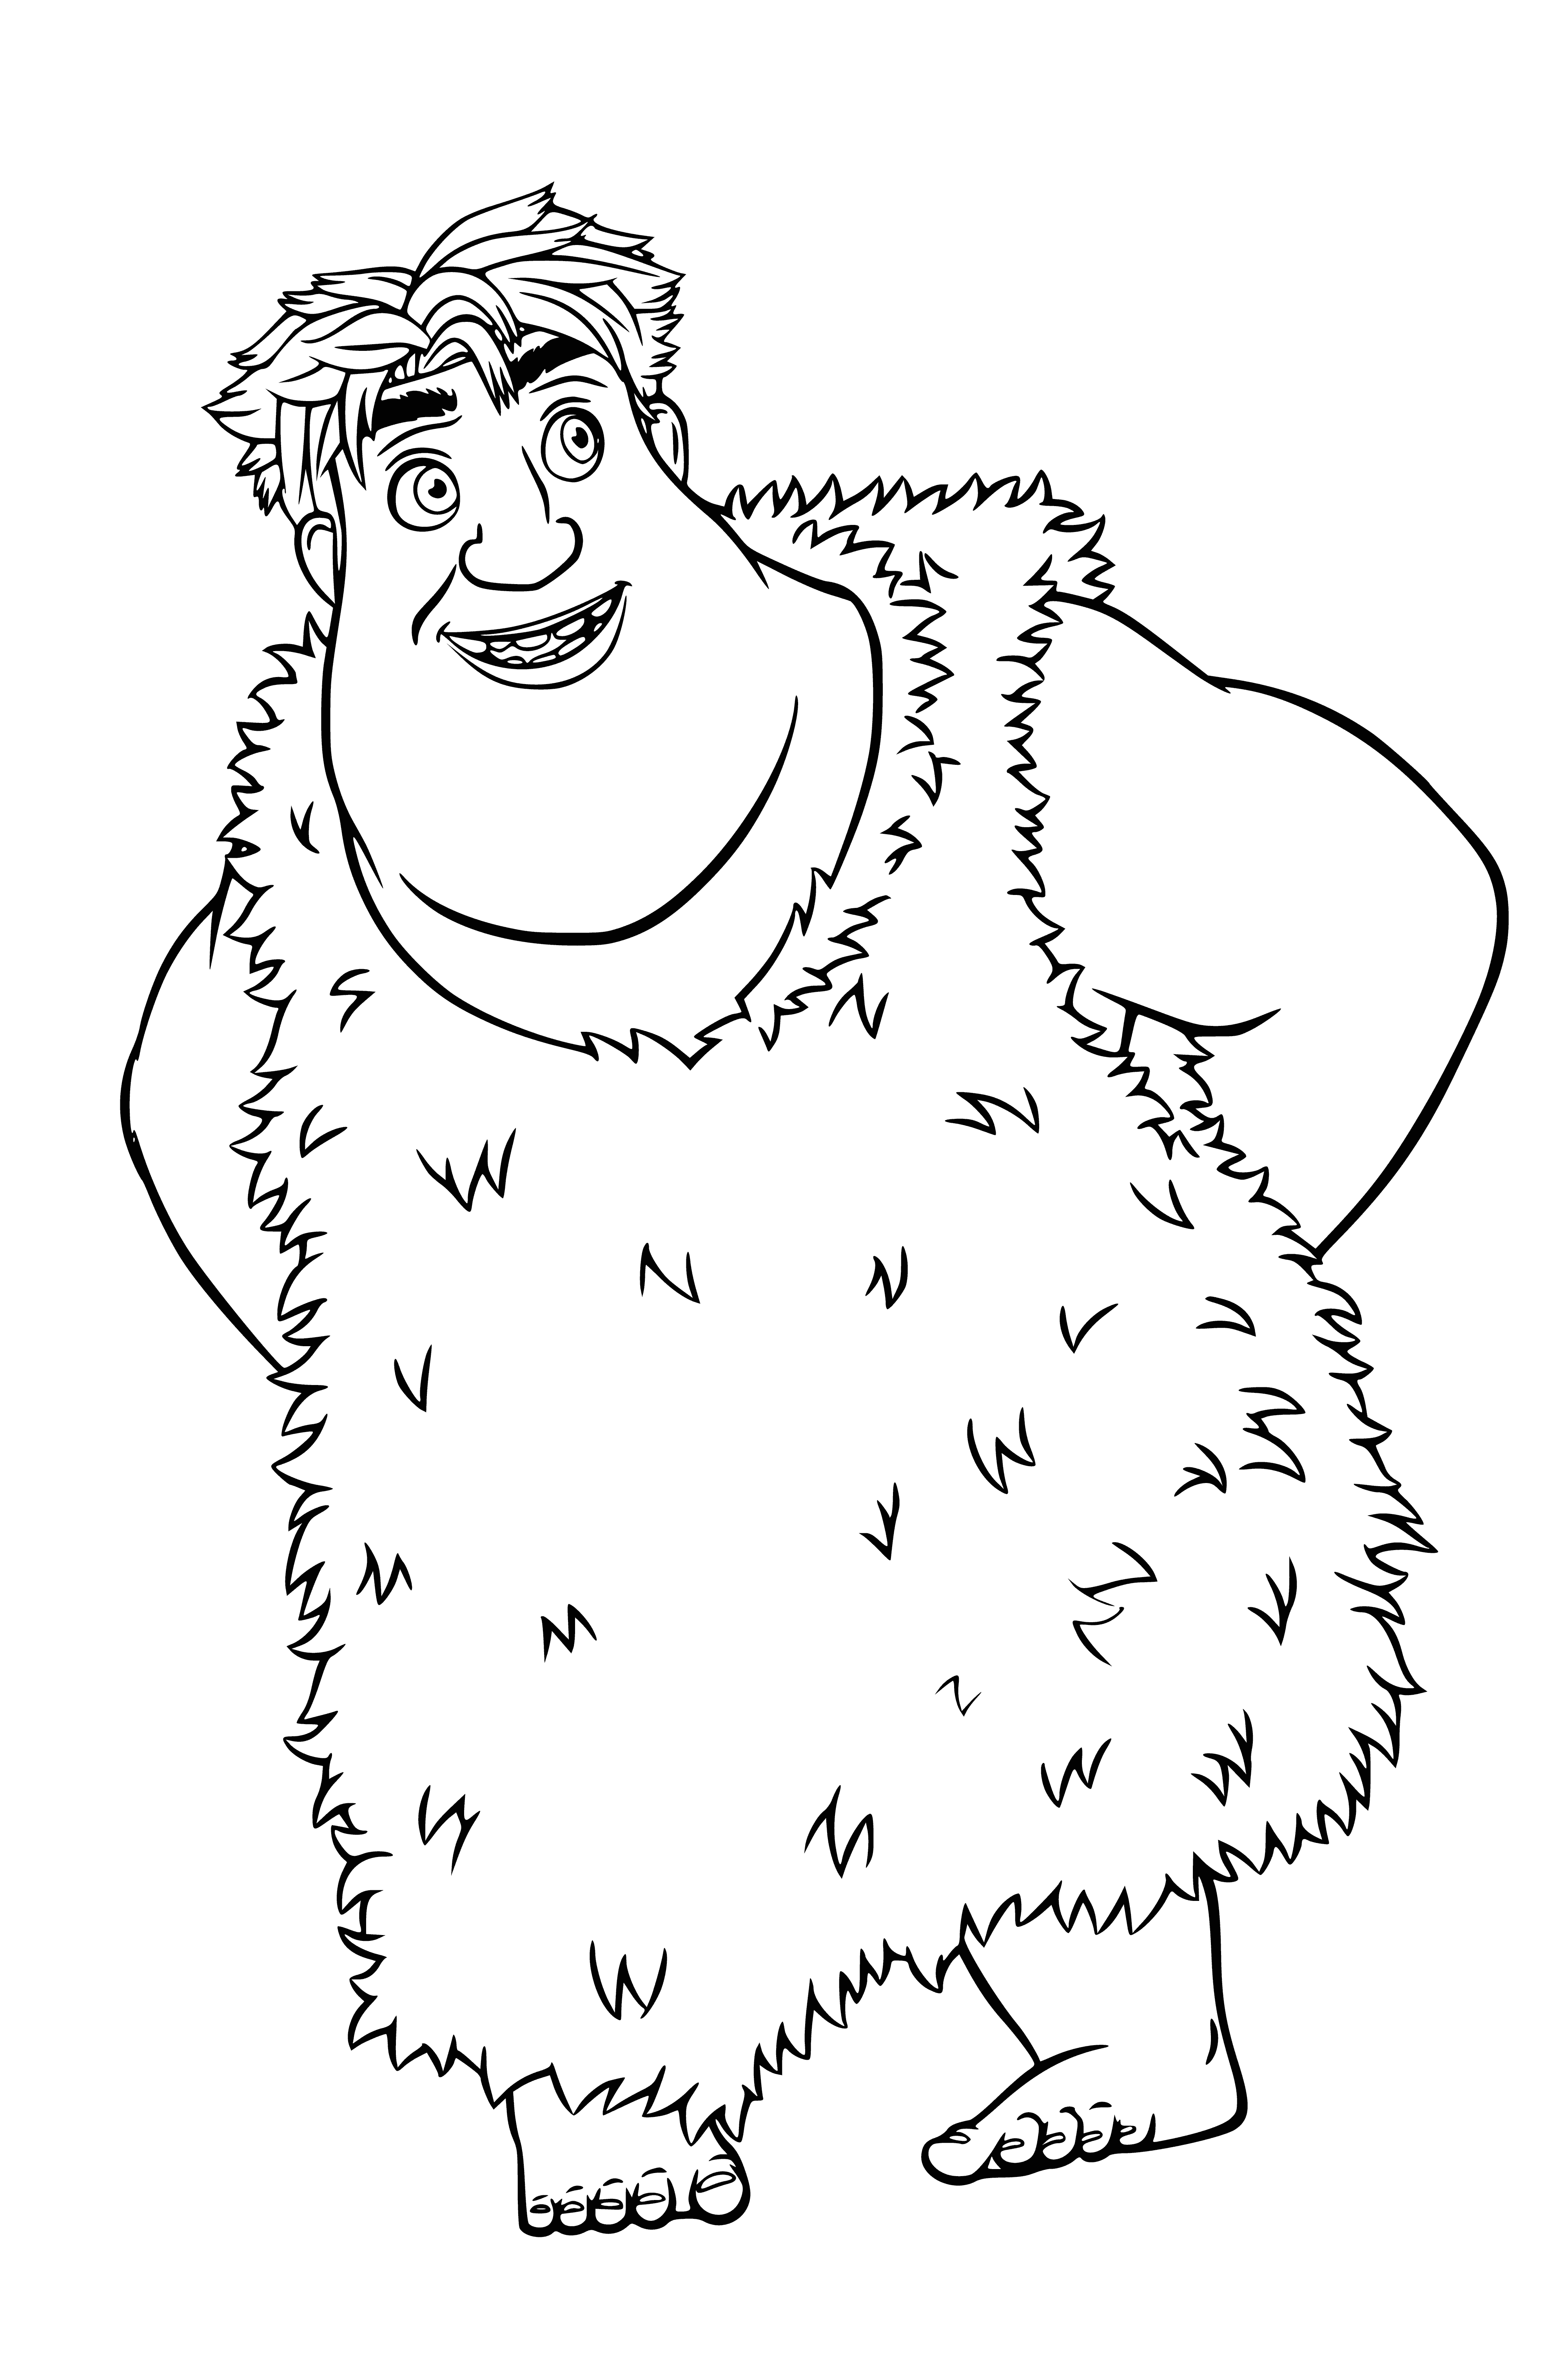 Tunk coloring page